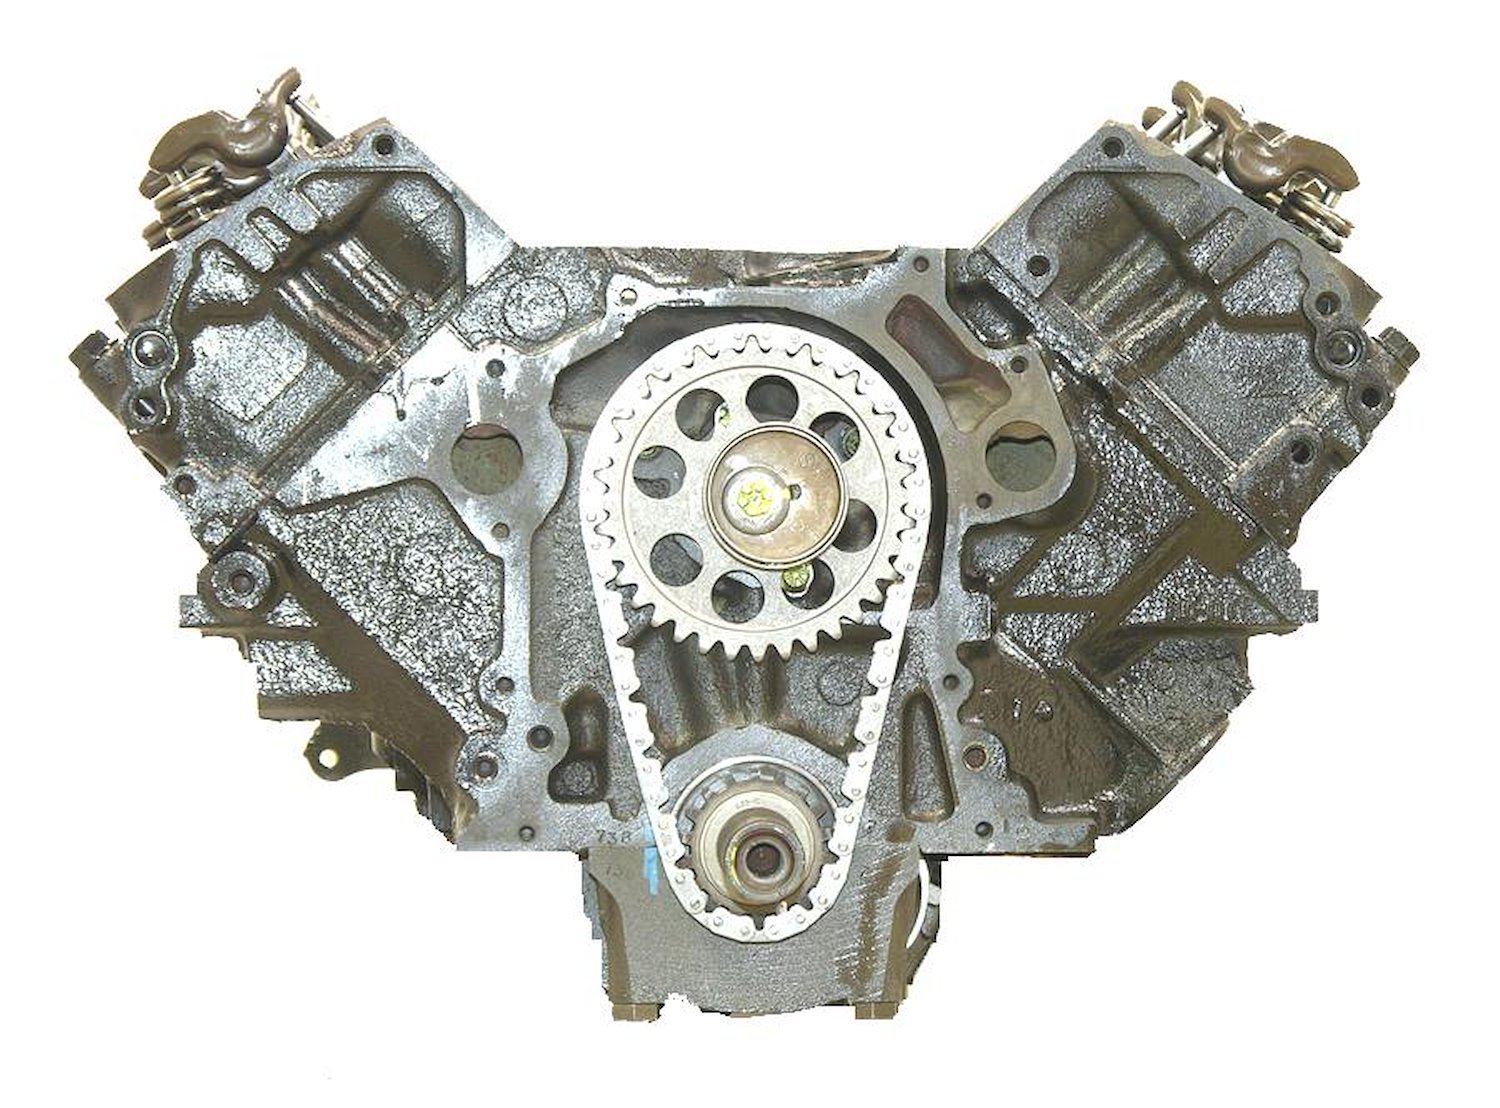 Remanufactured Crate Engine for 1979-1985 Ford Truck, Car,